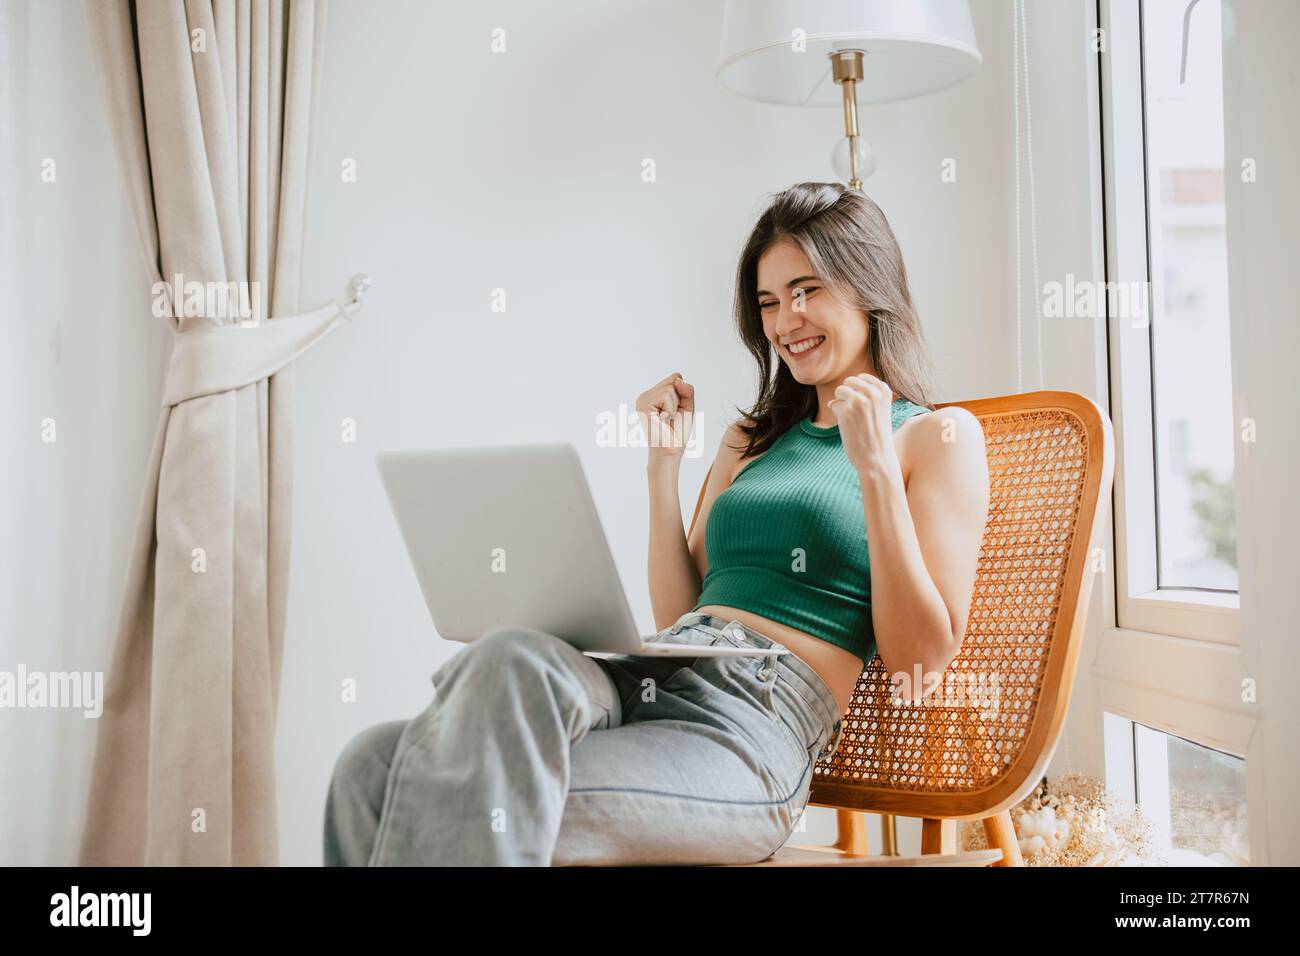 young woman with laptop computer at home happy cheerful success win positive expression Stock Photo